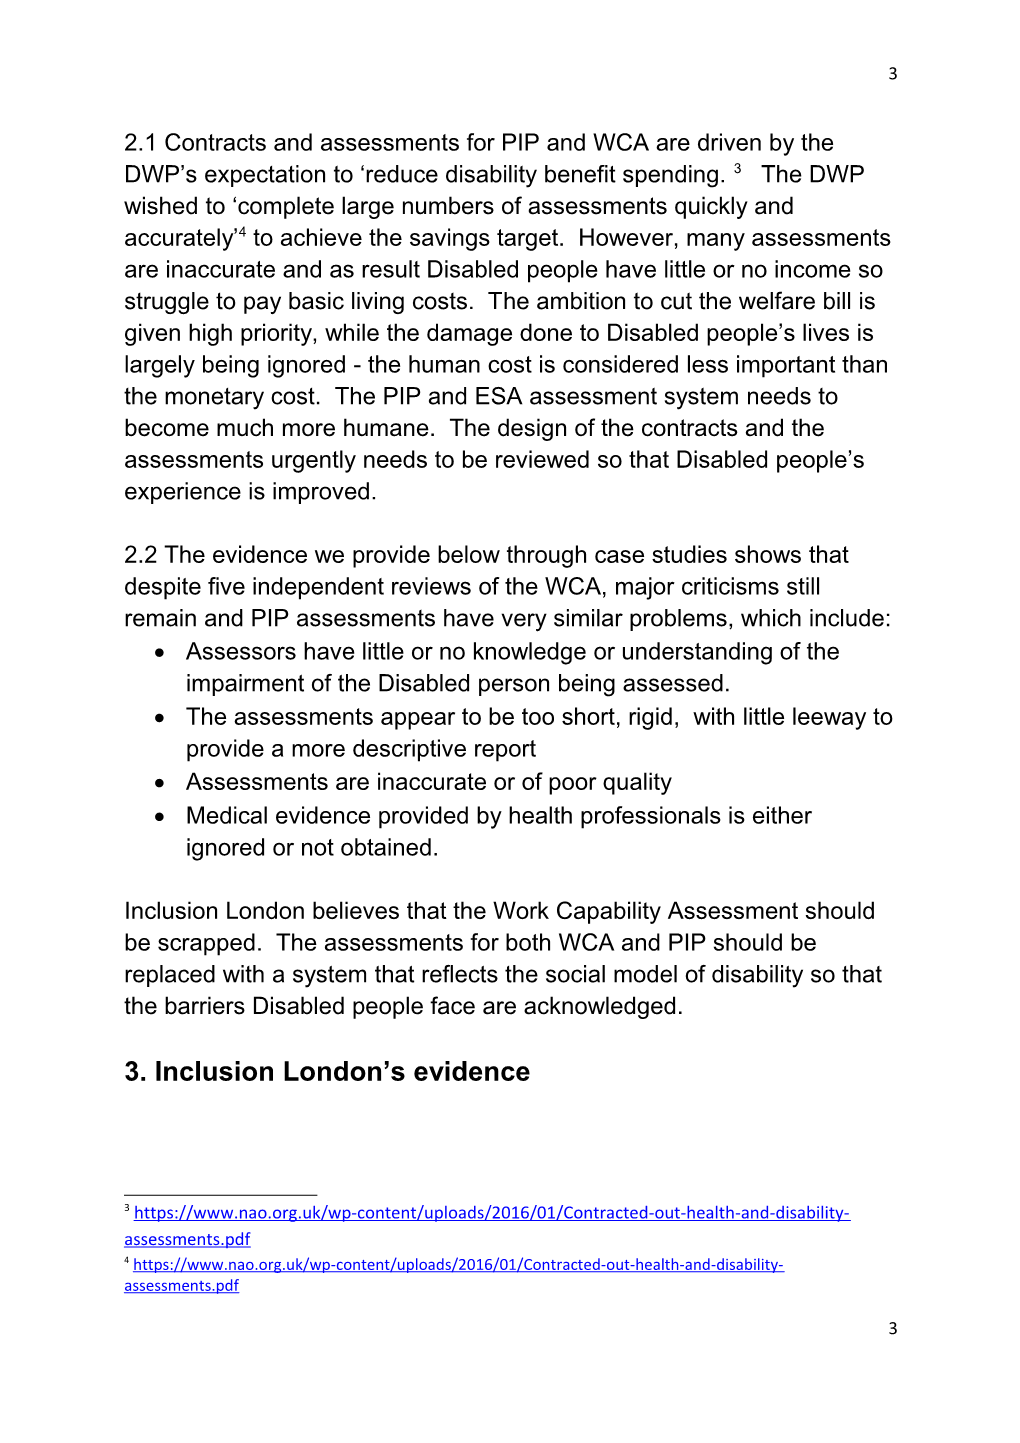 Inclusion London Evidence to the Inquiry on Contracted out Health and Disability Assessments